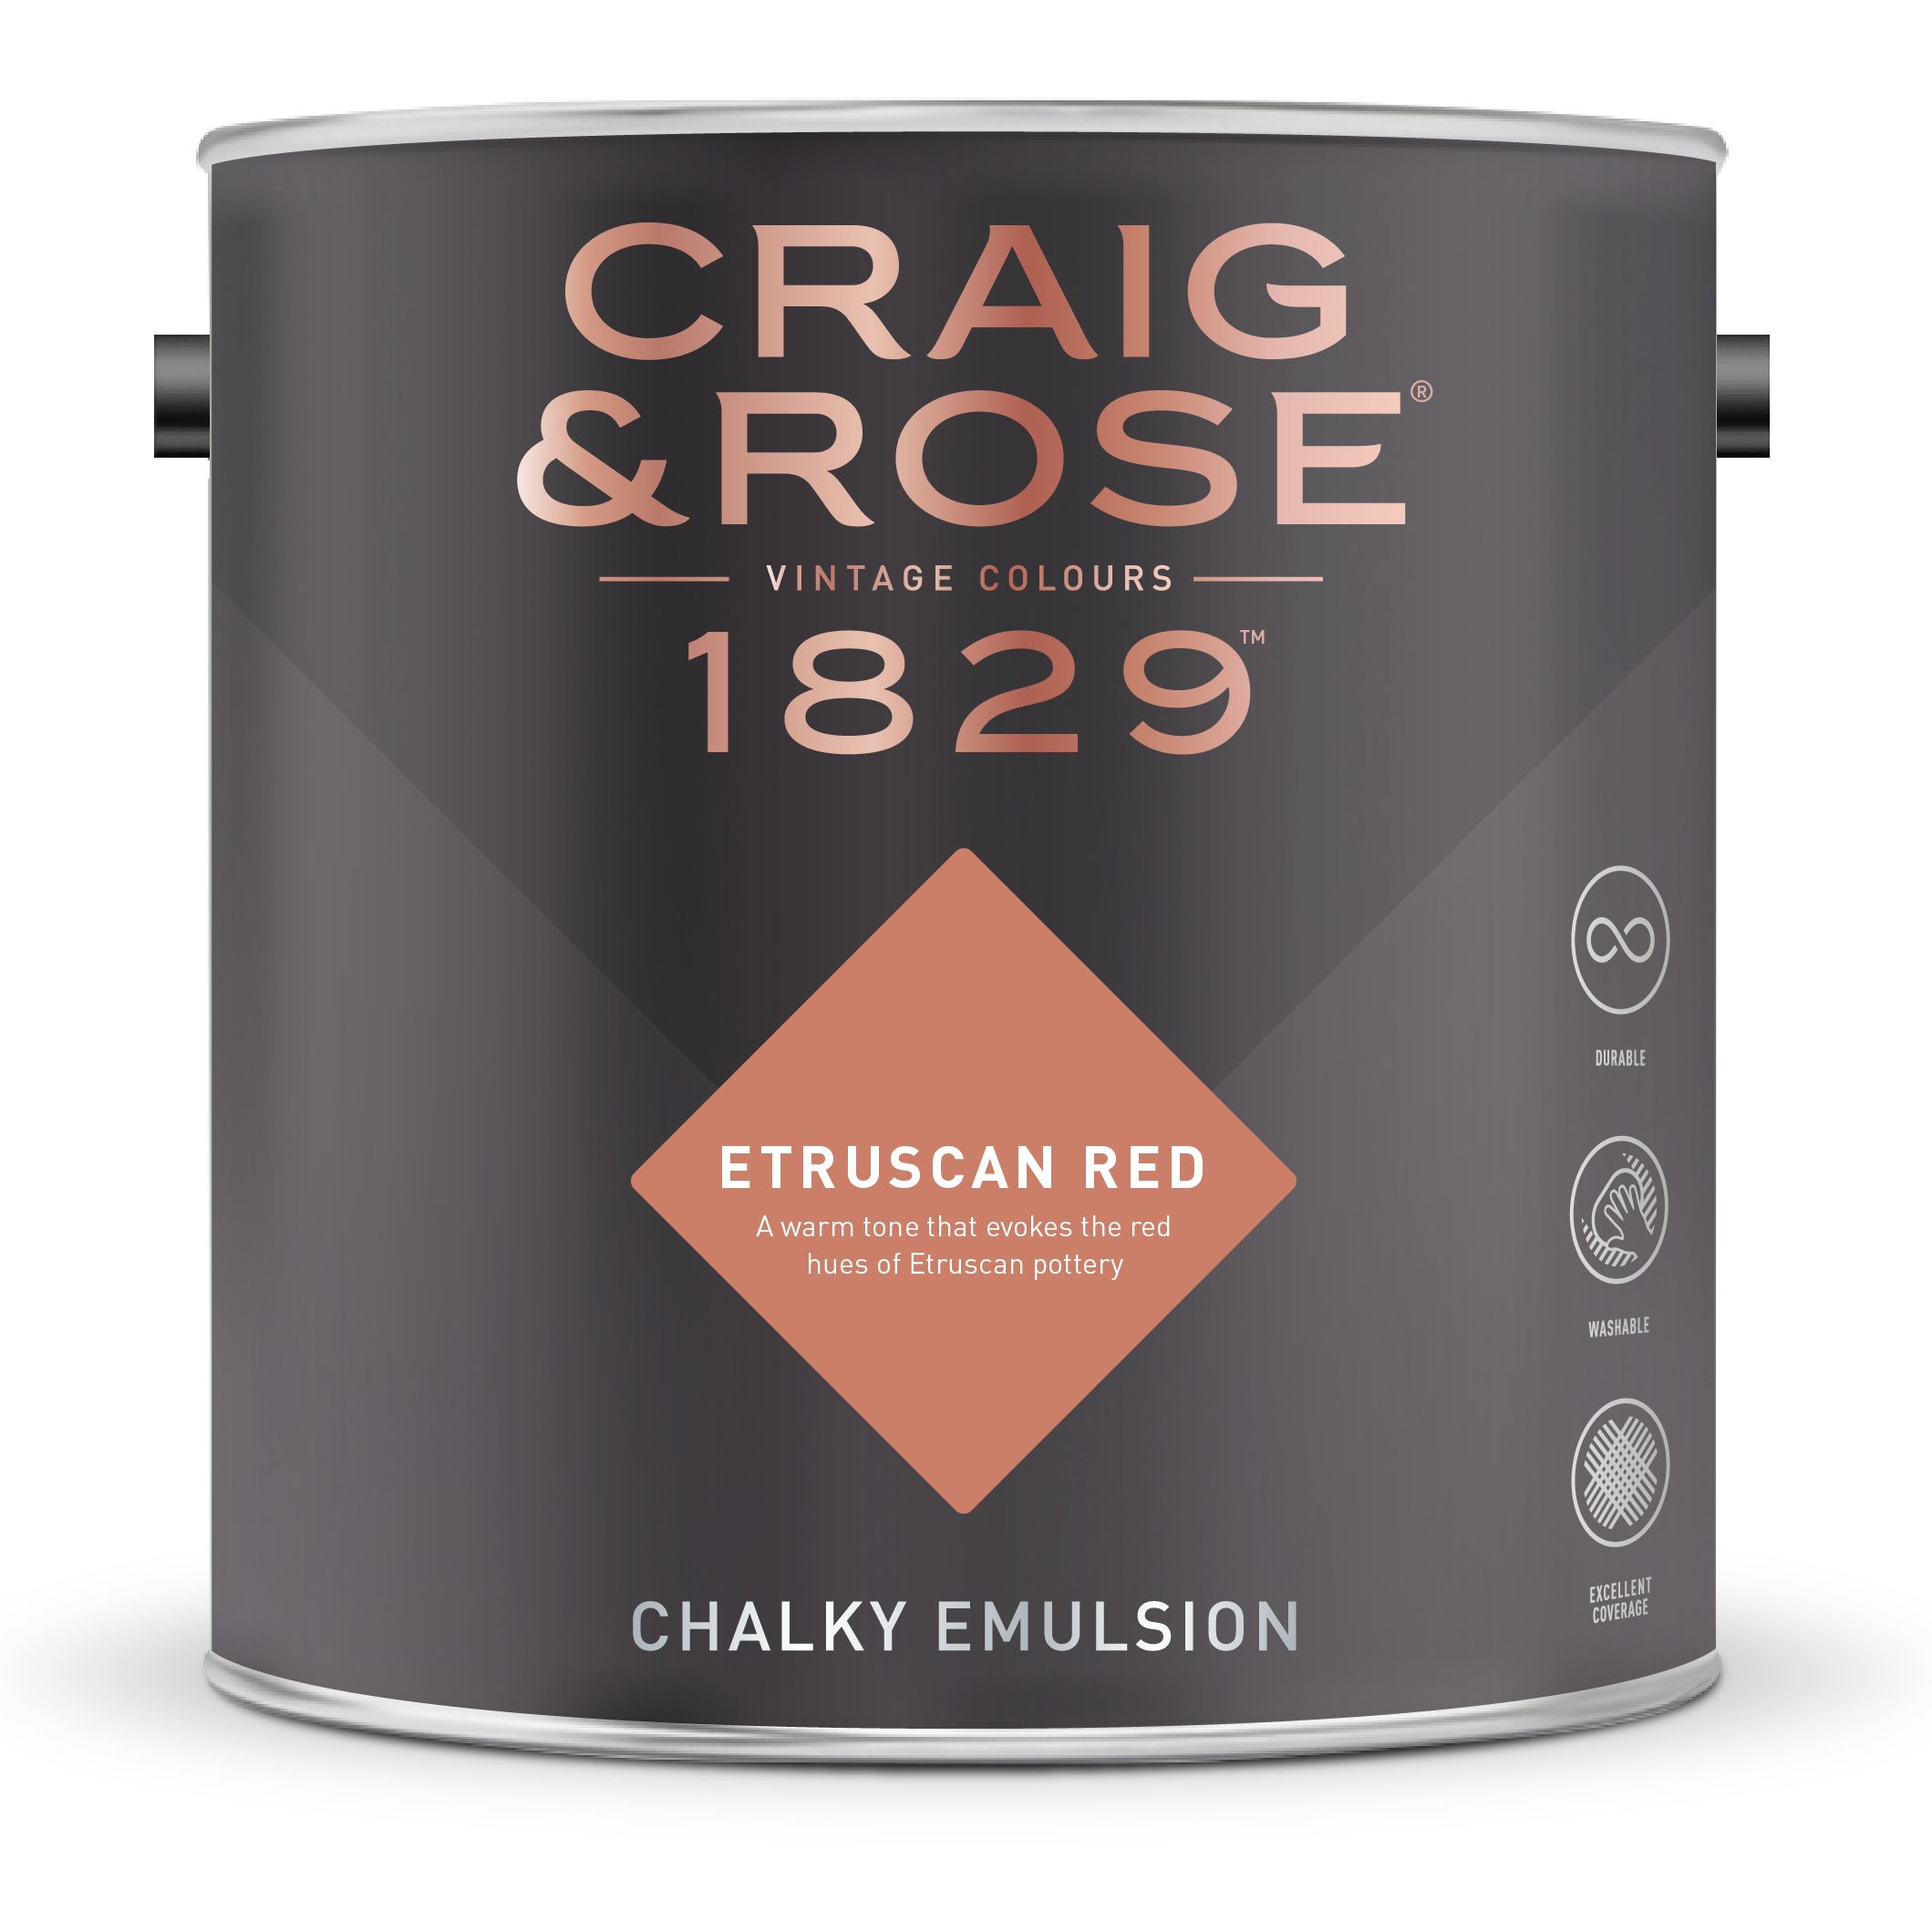 Craig & Rose 1829 Etruscan Red Chalky Emulsion paint, 2.5L